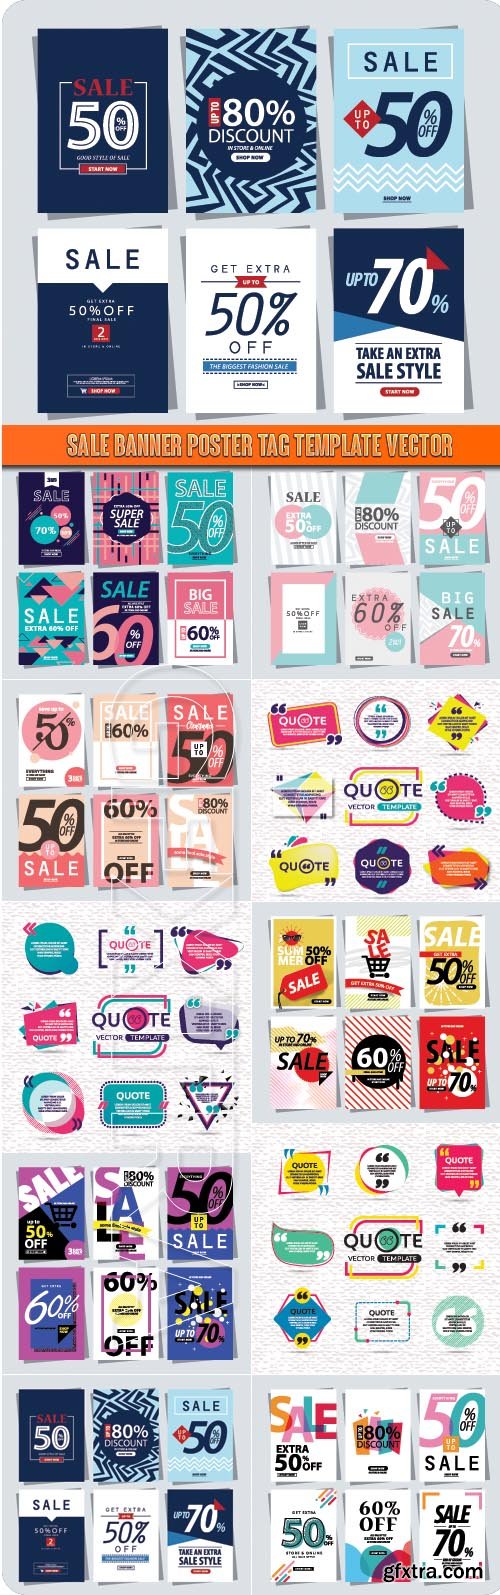 Sale Banner poster tag template vector